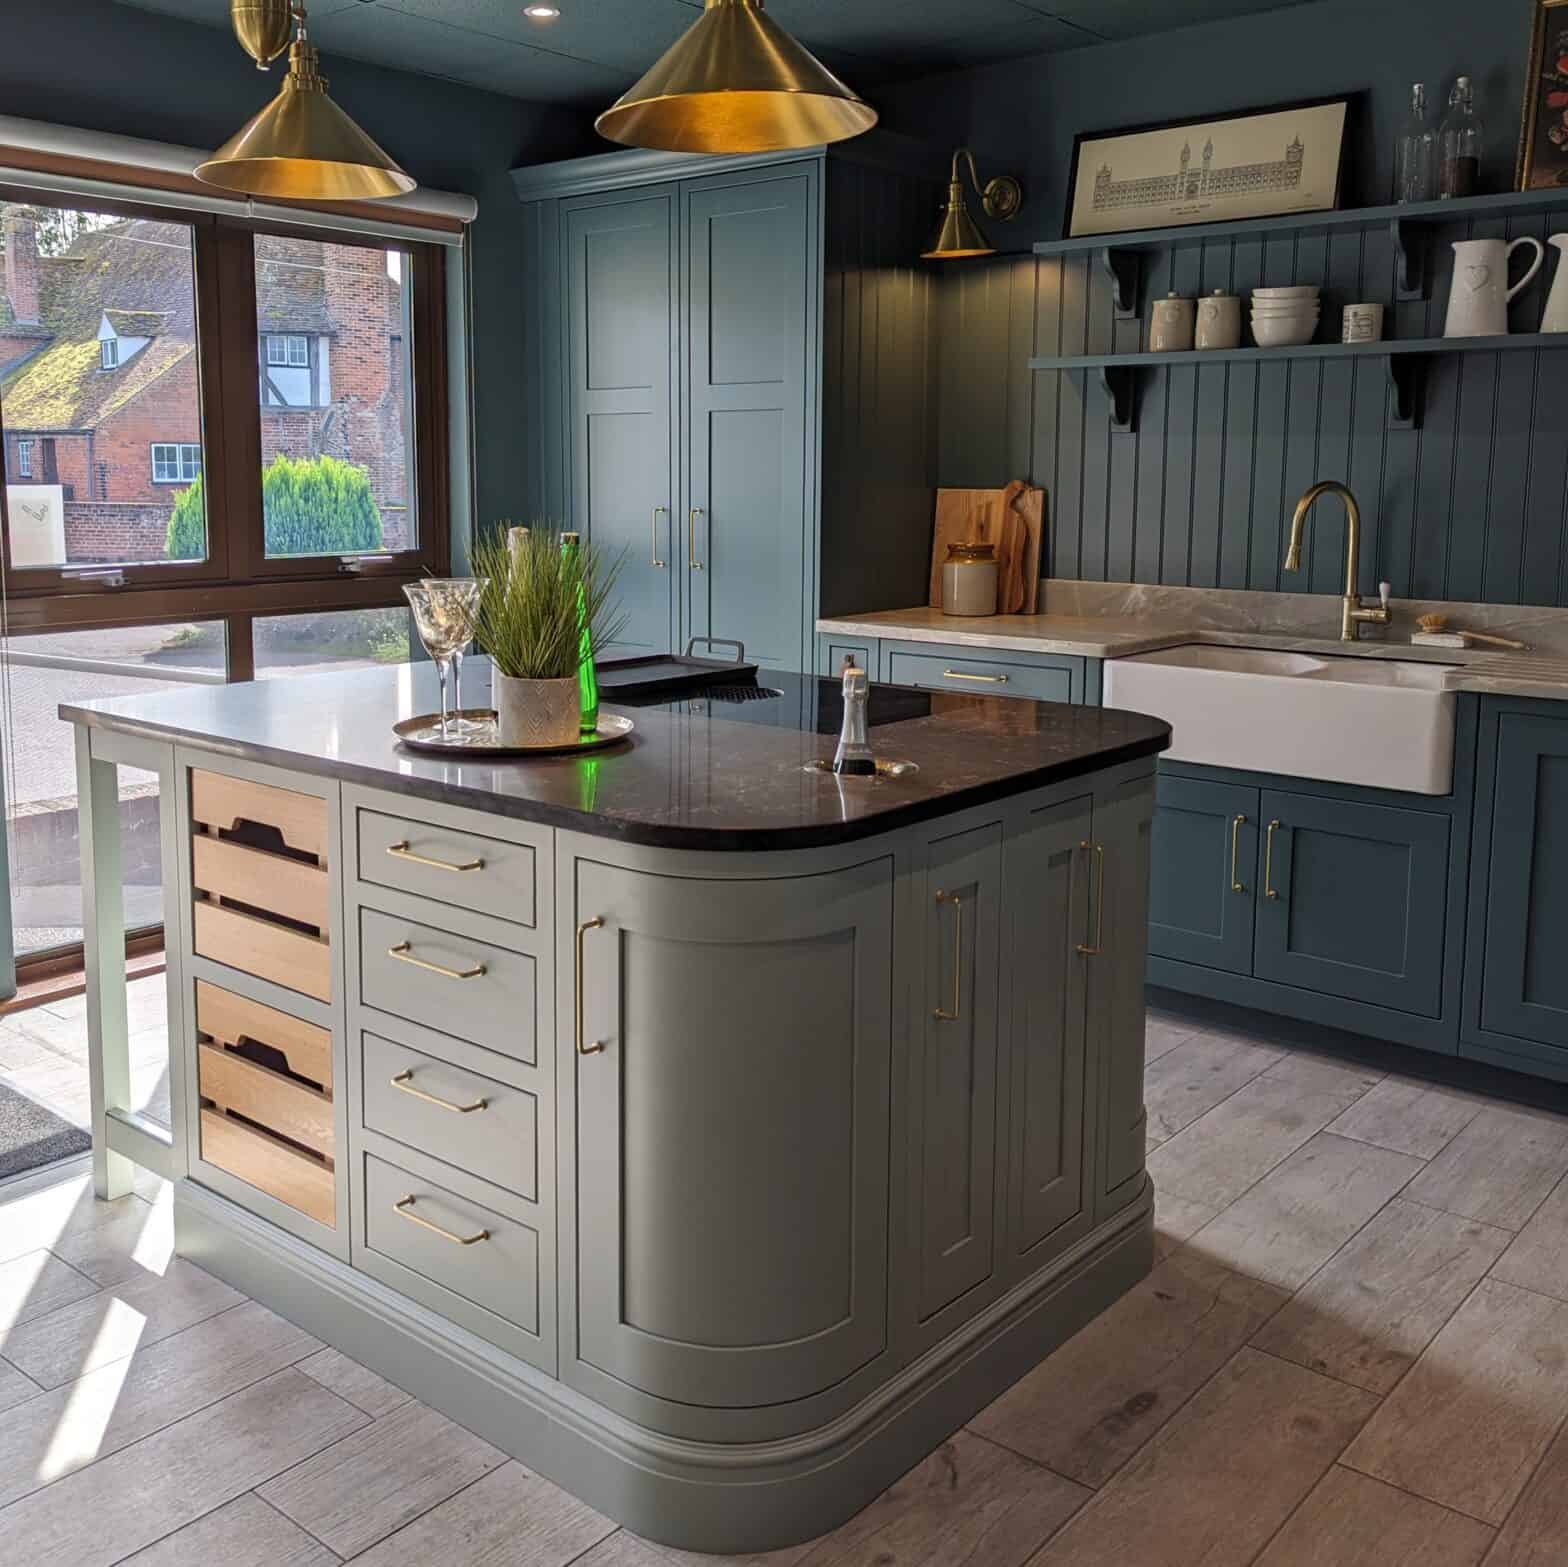 A photo of a traditional shaker style kitchen in blue with a blue/green painted island that has rounded edges to one side and a breakfast bar to the other. Tongue and groove panels feature on the back wall behind the sink with a granite worktop and upstand.